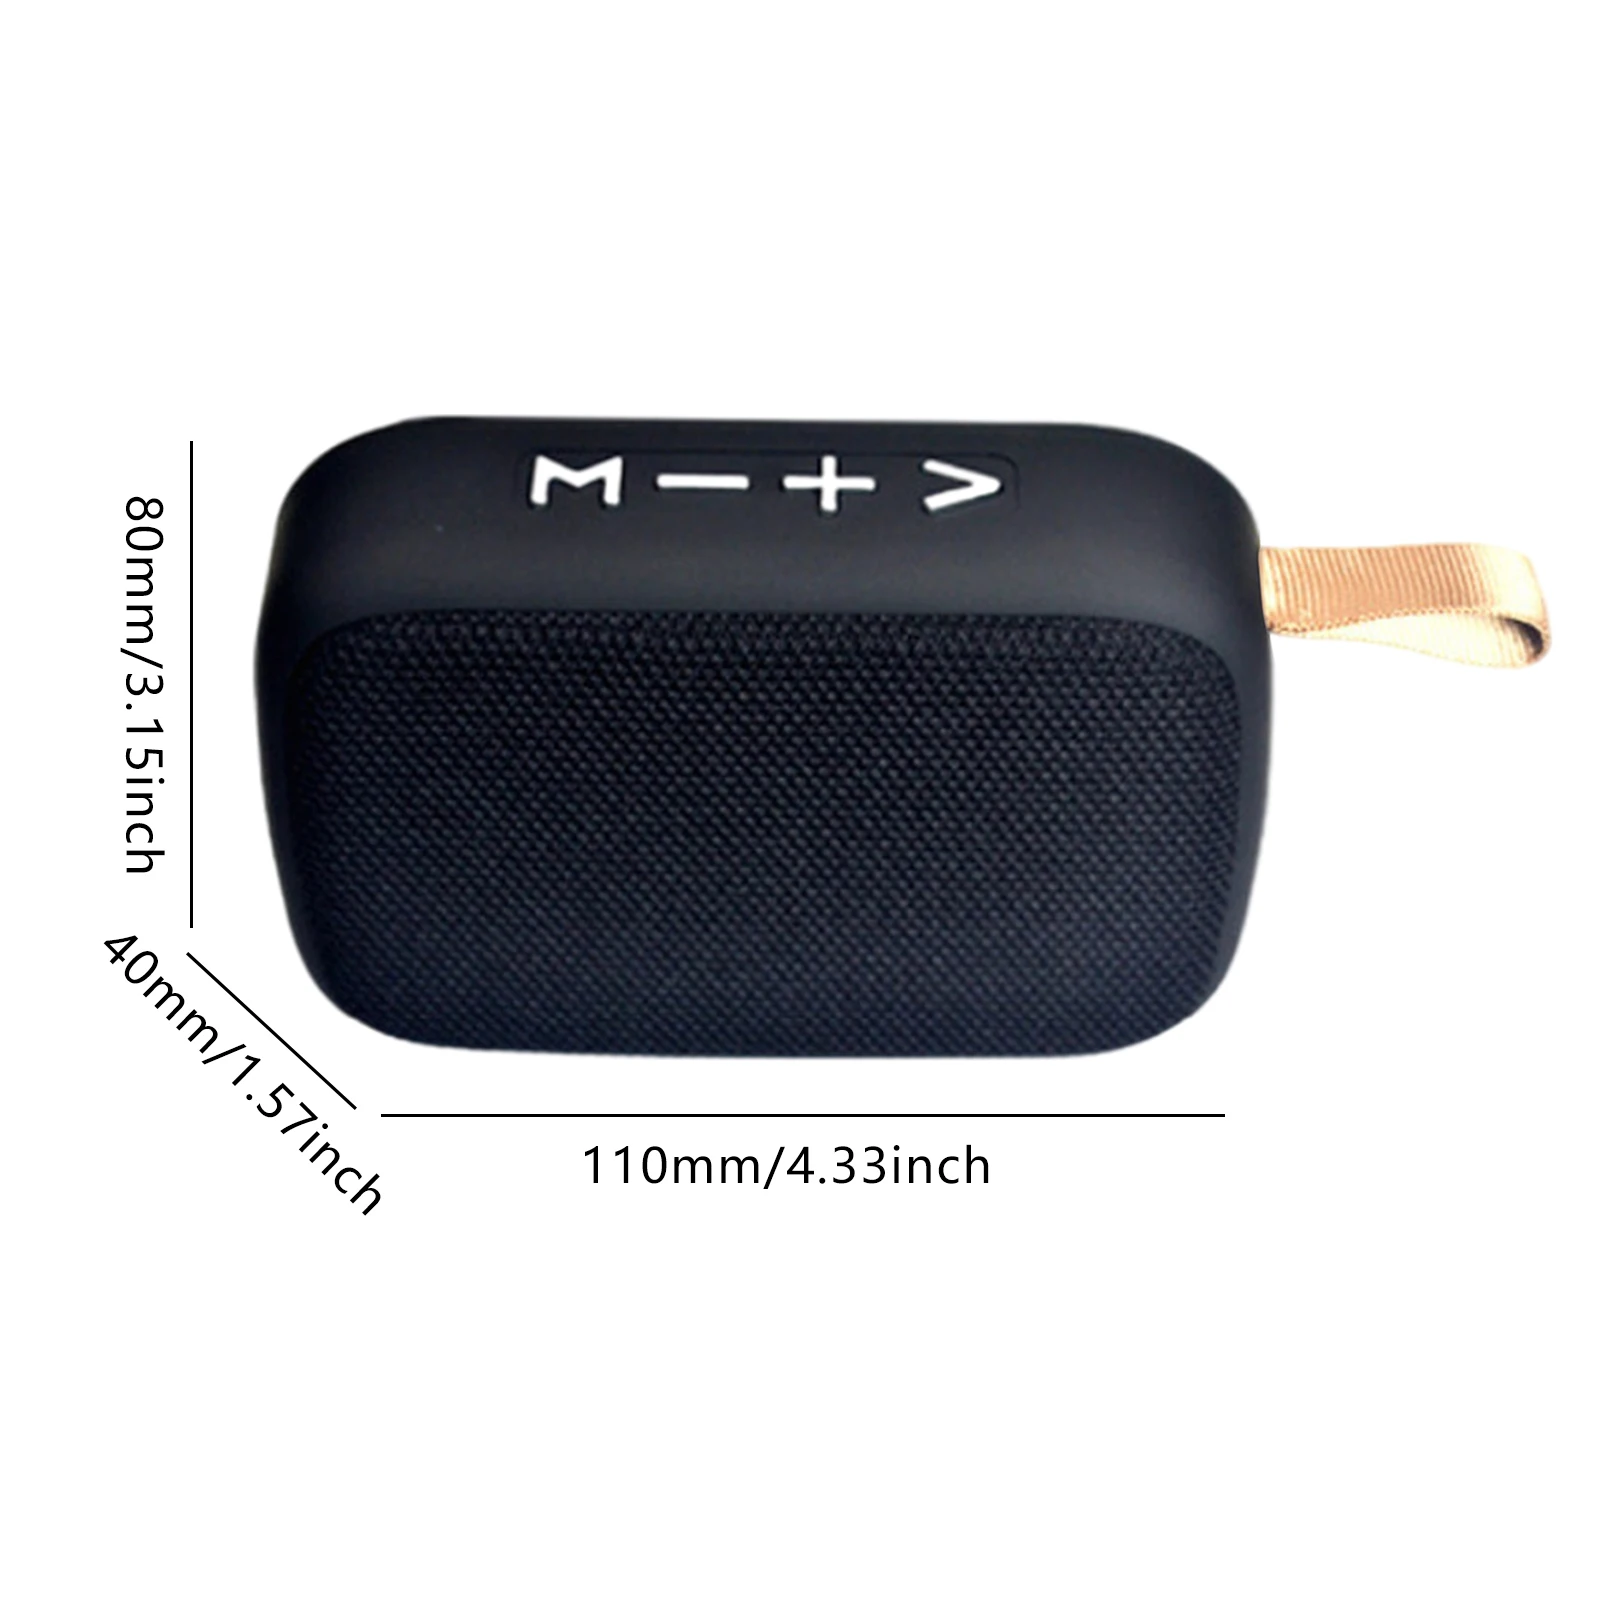 Portable Speaker Outdoor USB Wireless Subwoof Mini Sound Box Support BT TF Card FM Radio Speakers Voice Broadcast images - 6